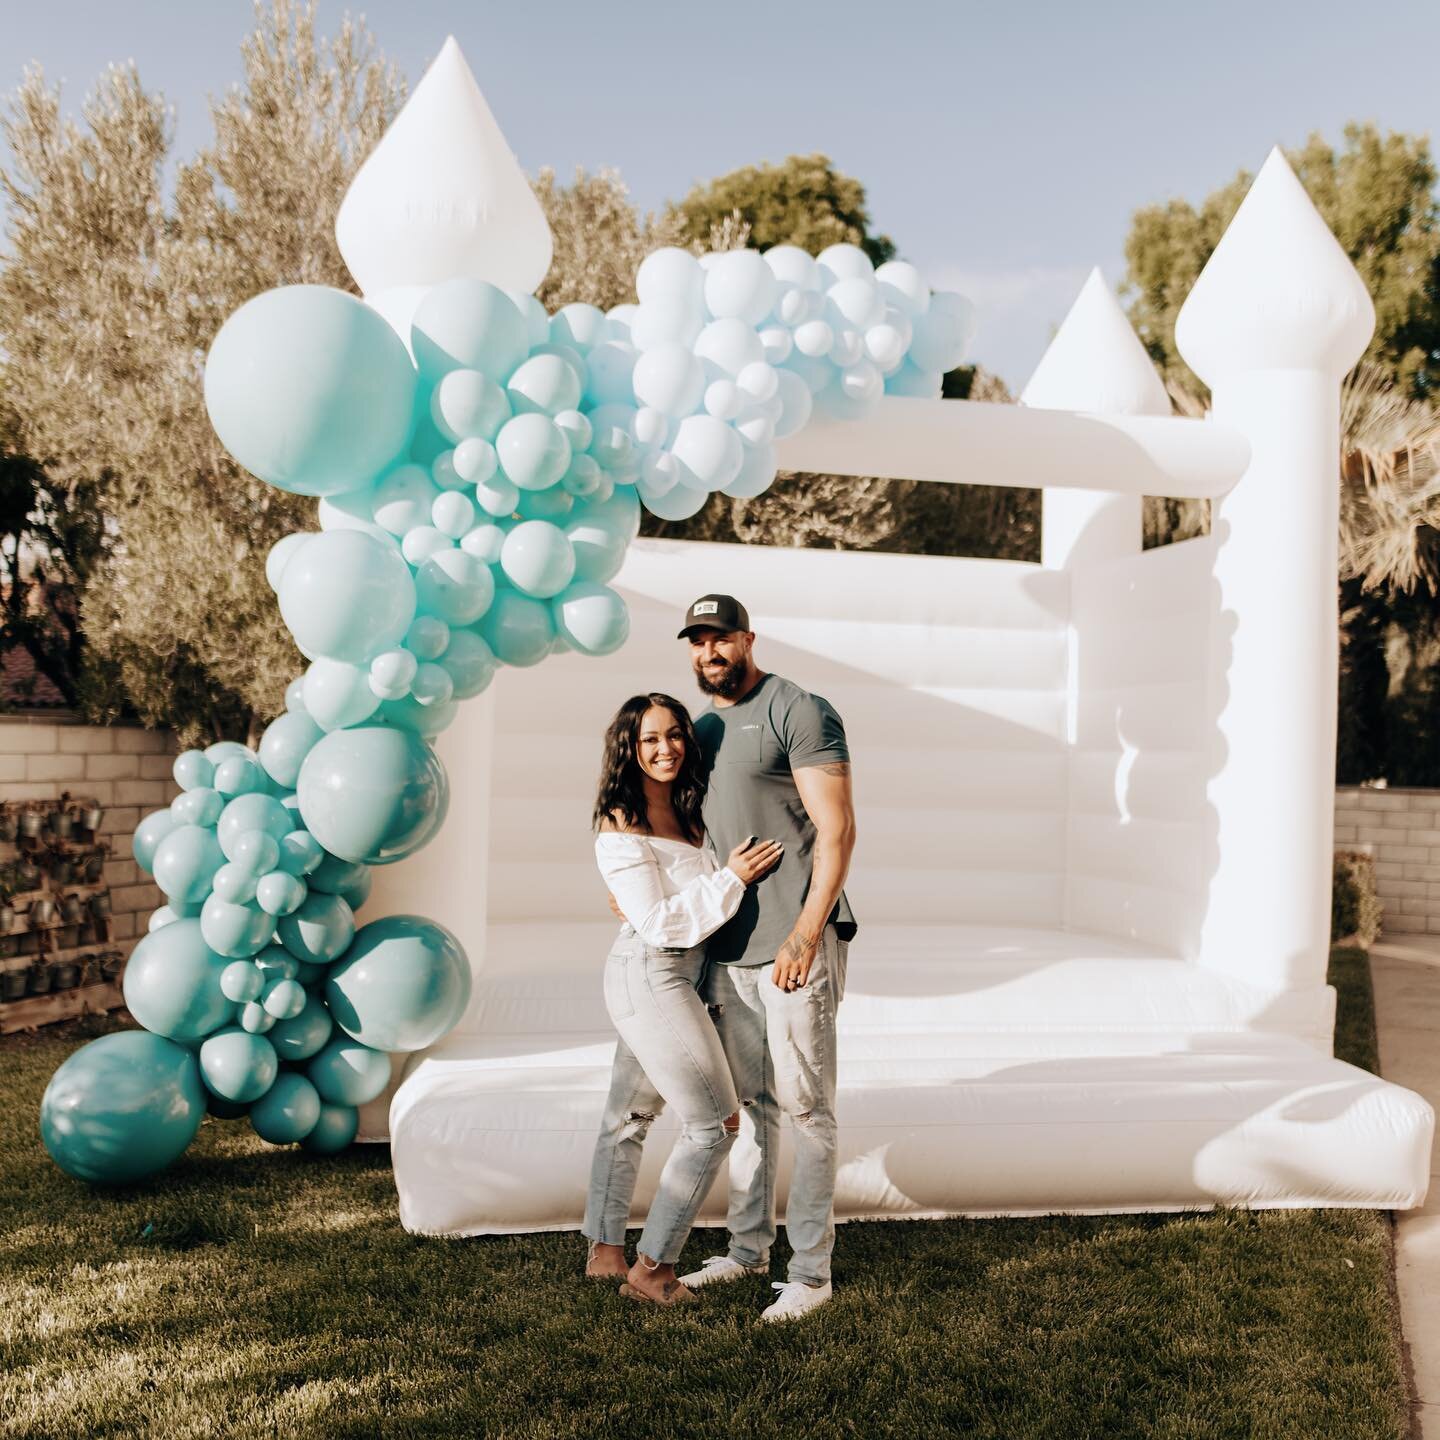 Meet Chase and Kennadi&hellip;the NEW owners of Inflate High Desert. 

We love them so much and know they are going to kill it! 🙌🏼 We couldn&rsquo;t be more proud to pass the business onto them.